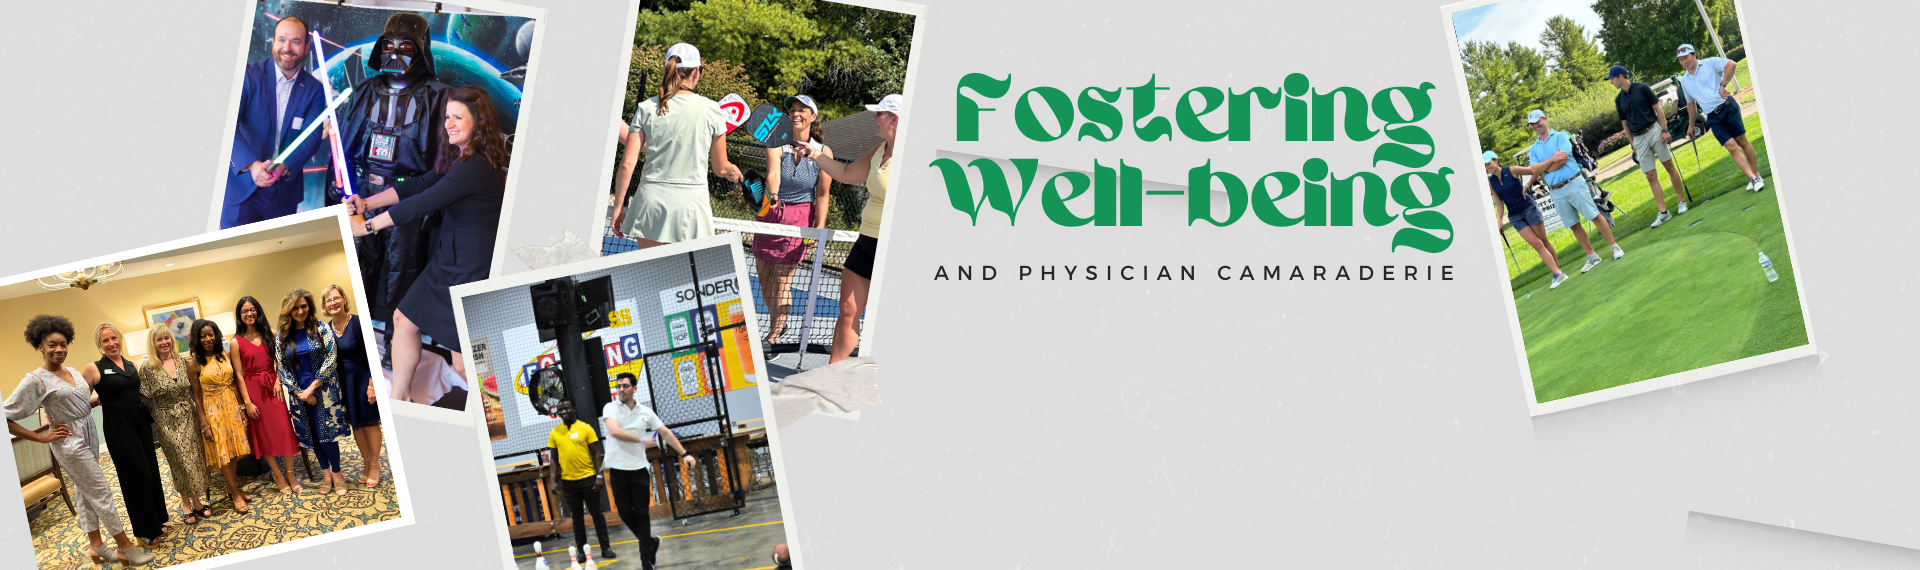 Fostering Physician Well-being